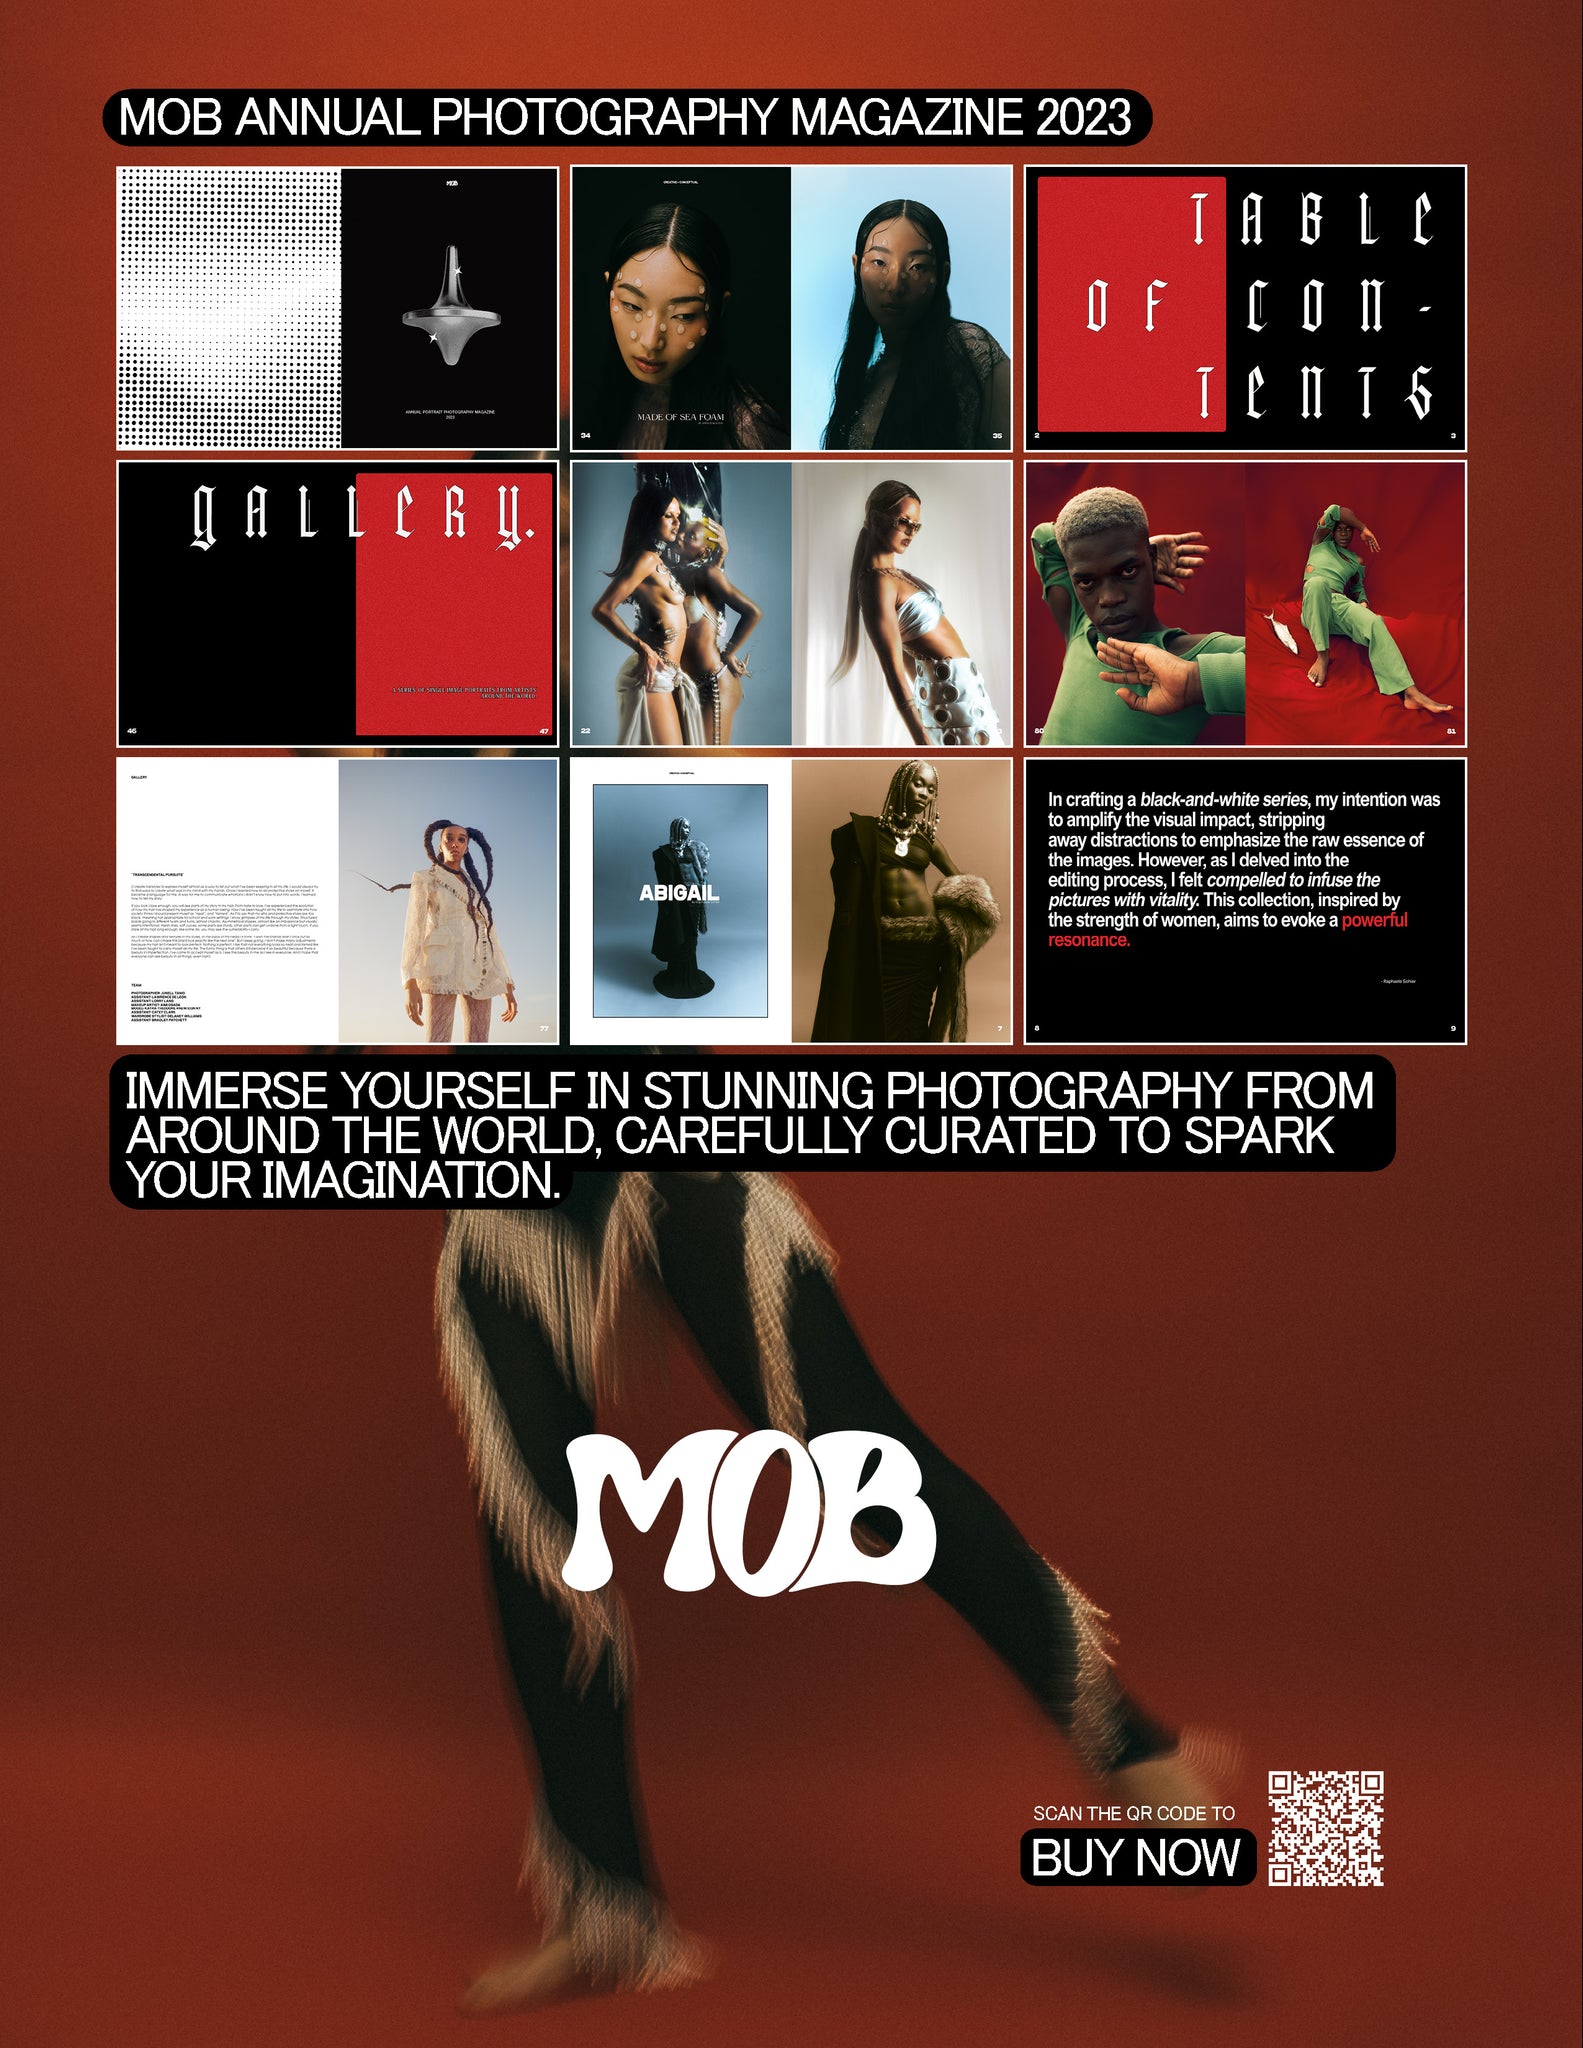 MOB JOURNAL | VOLUME FORTY| ISSUE #05